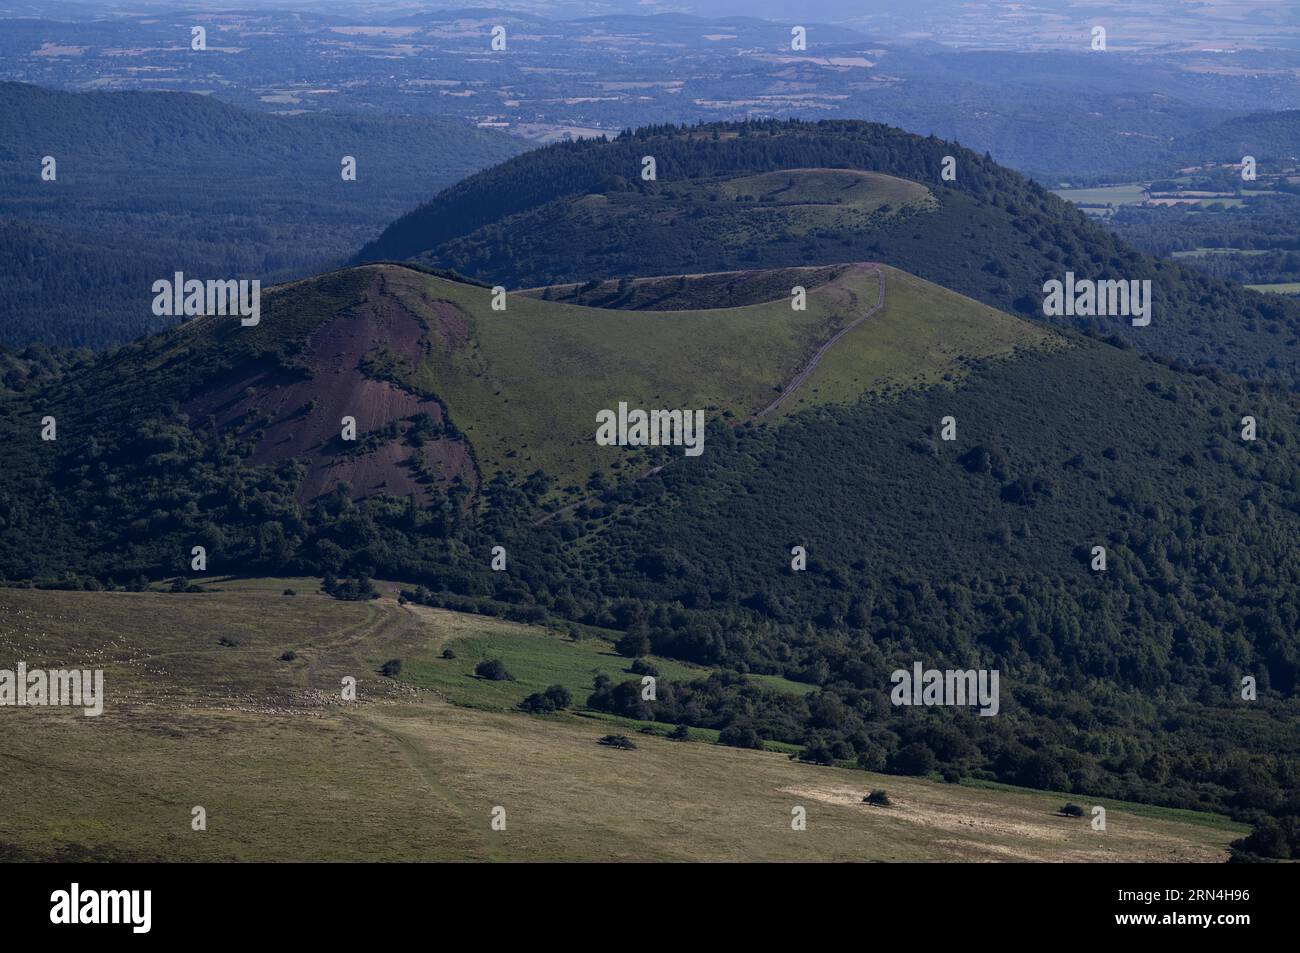 View from the Puy de Dome to the Chaine des Puys, Puy-de-Dome department, Auvergne-Rhone-Alpes region, France Stock Photo